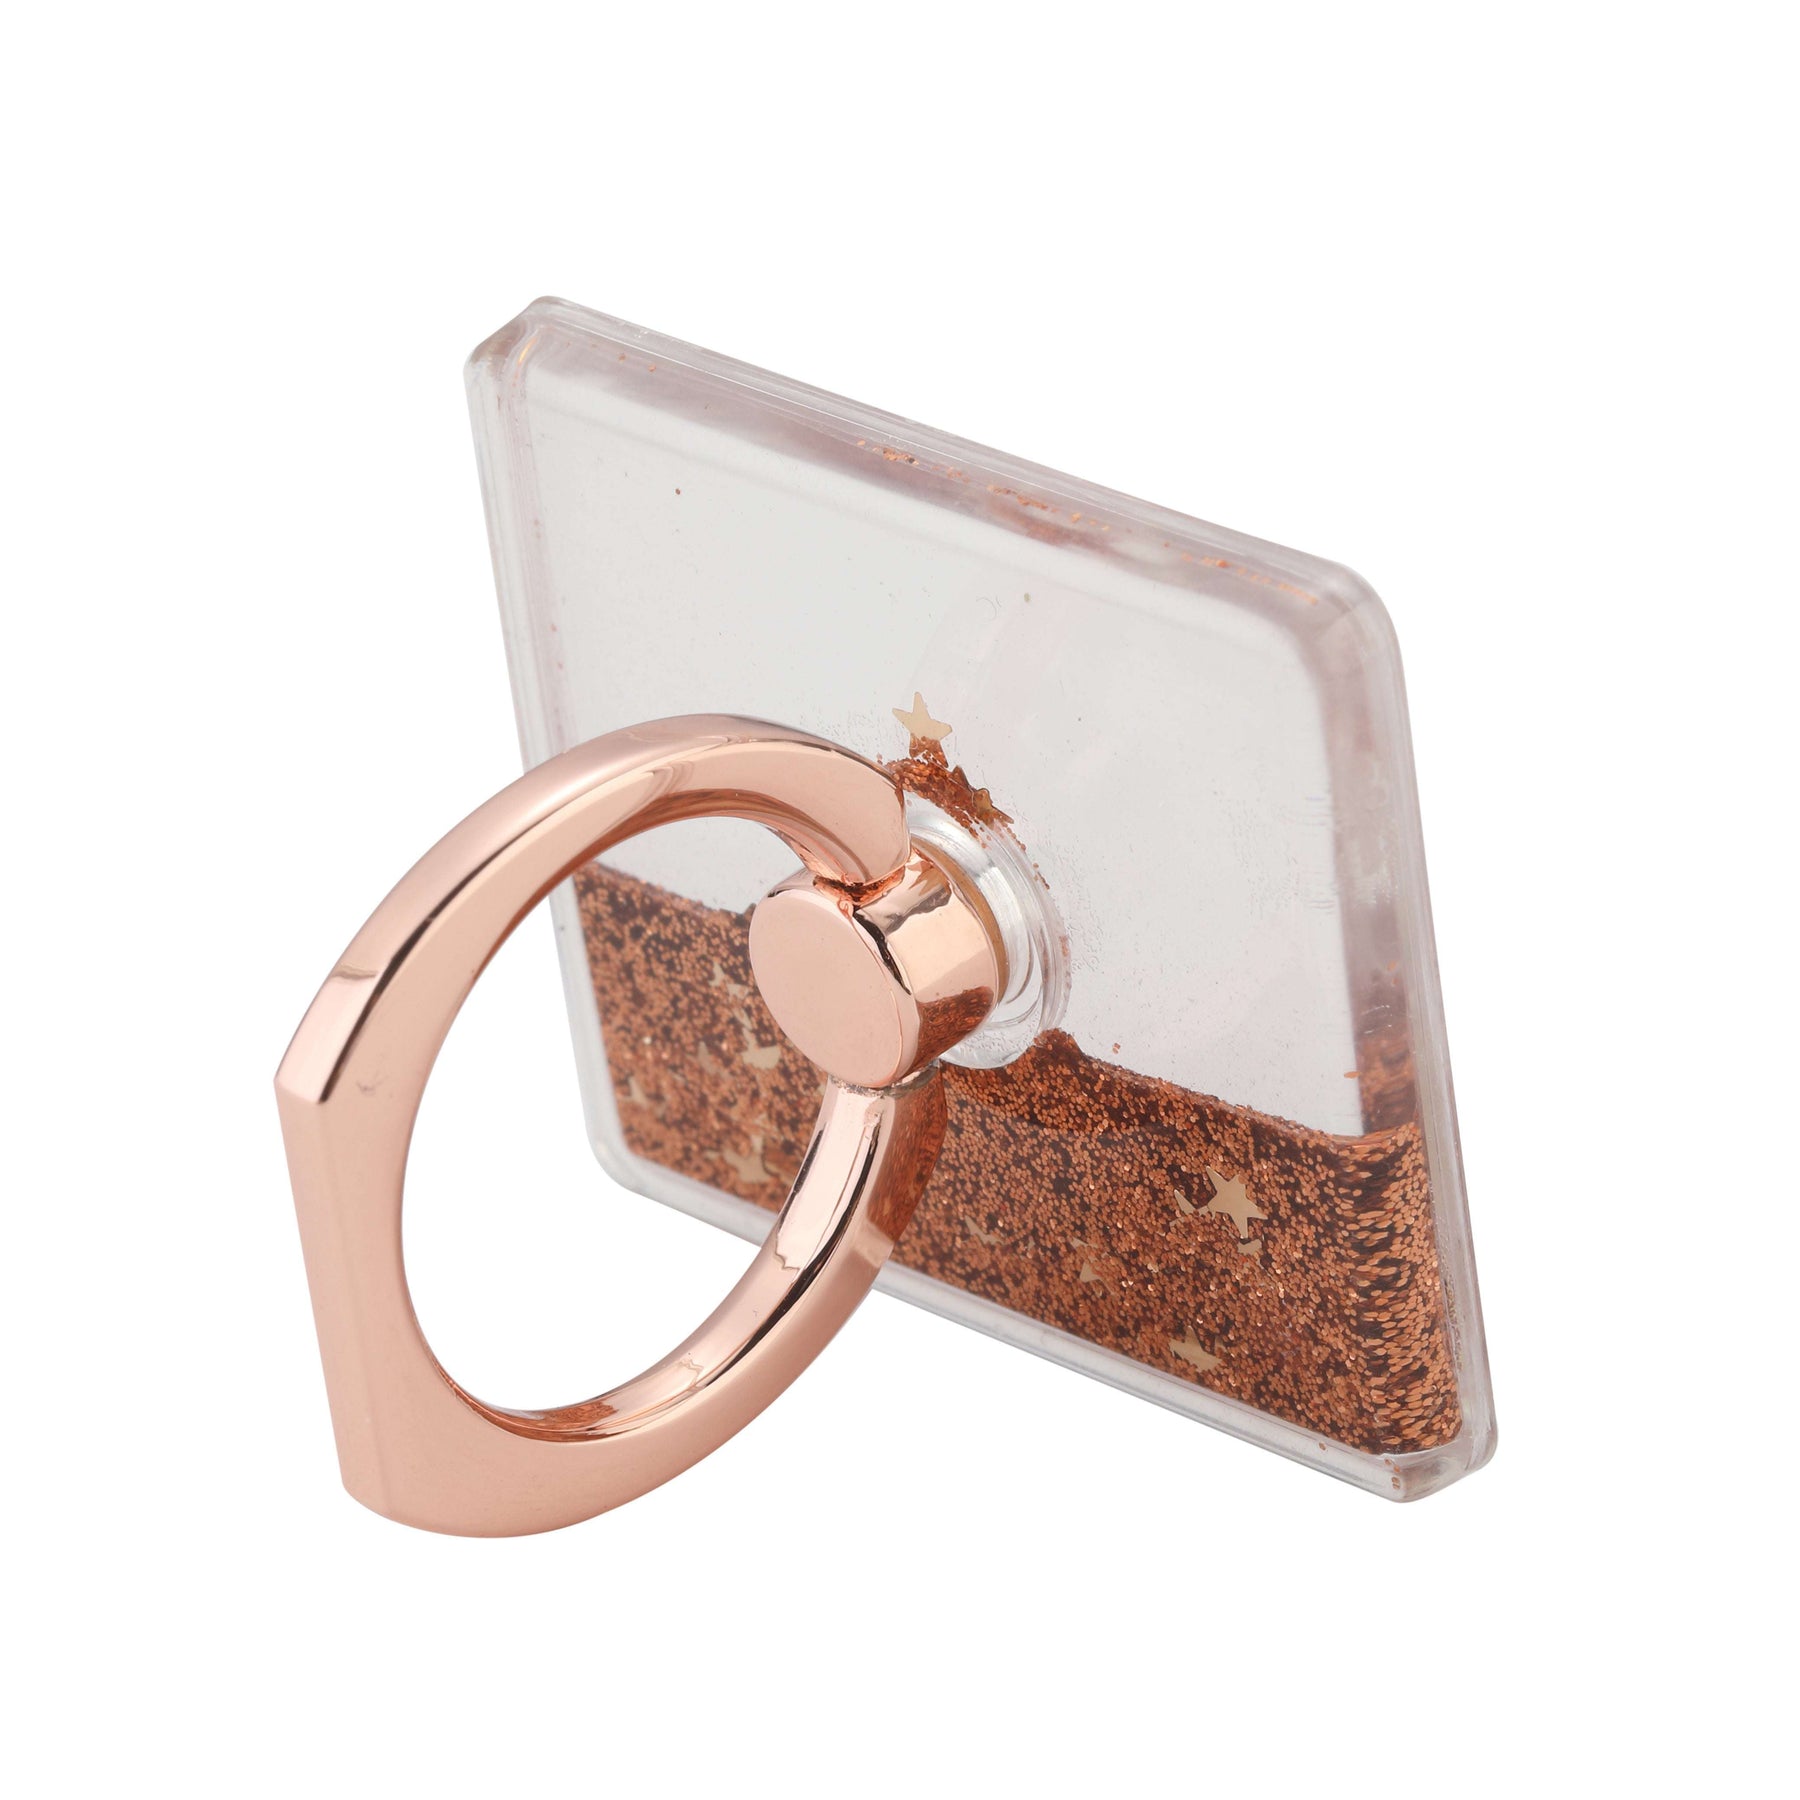 Secure Grip Phone Holder Ring & Stand - 360° Rotation (Glitter Series)